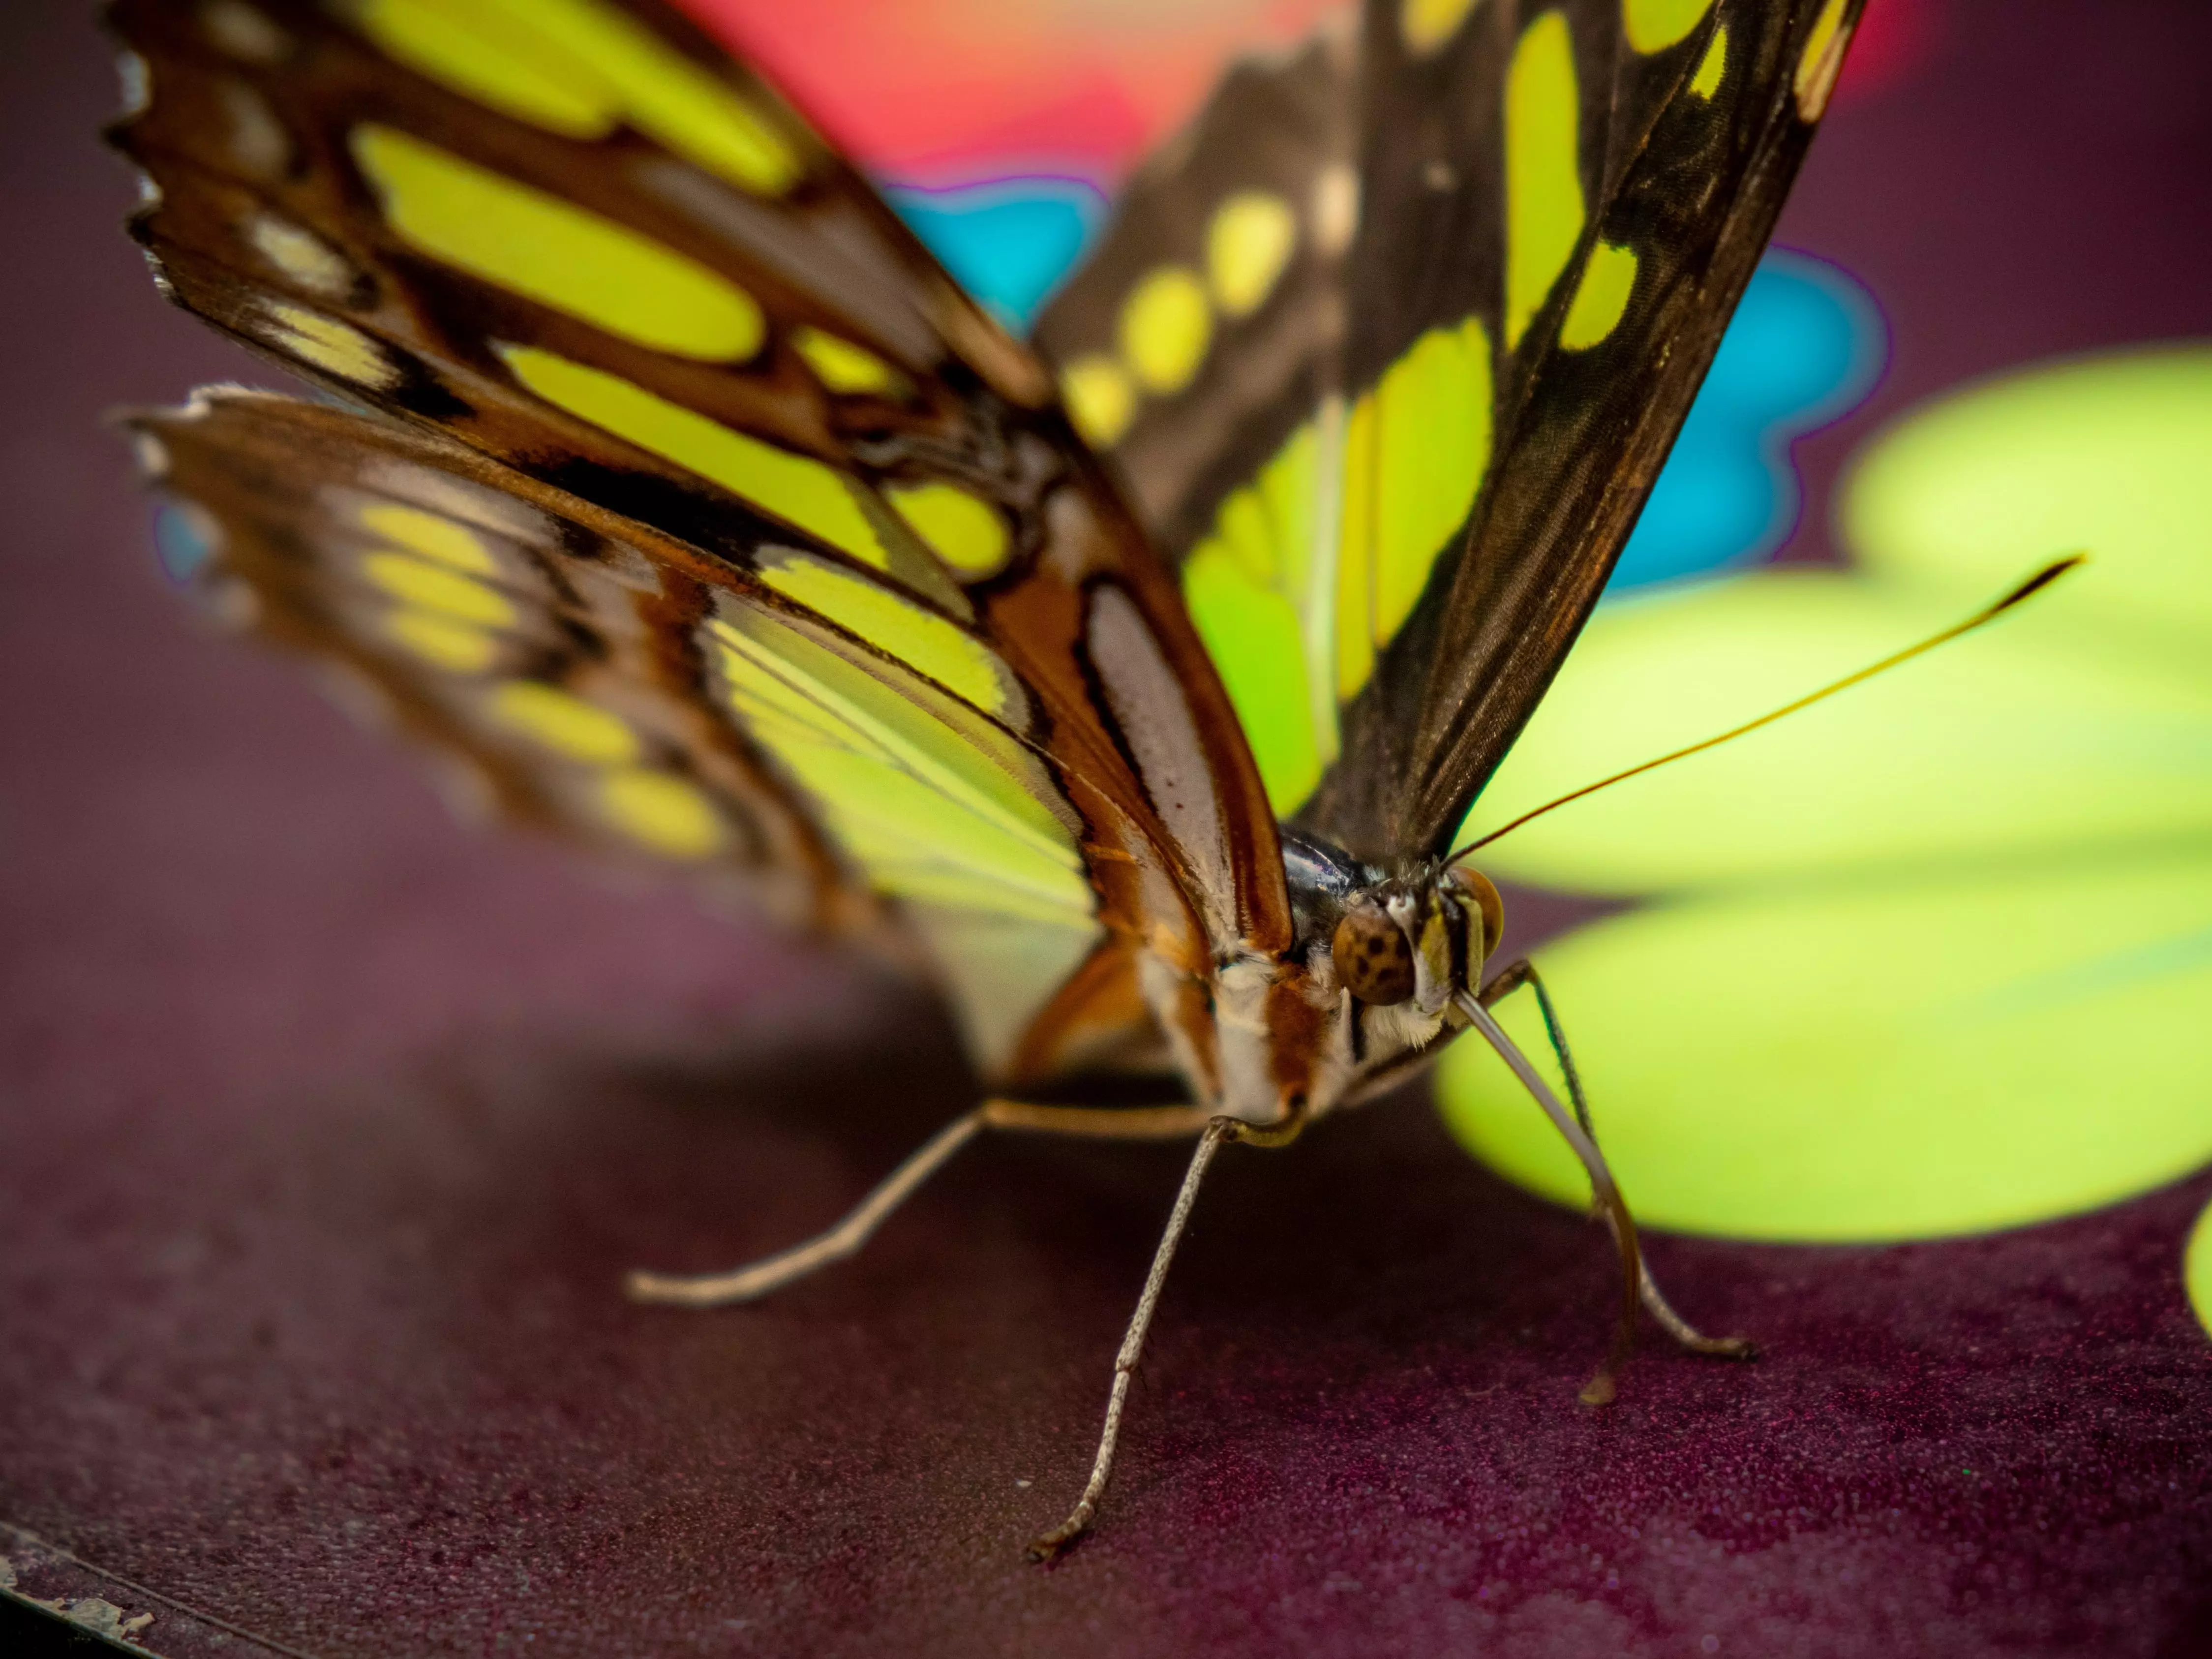 A close up of a rare butterfly living at Whipsnade Zoo.